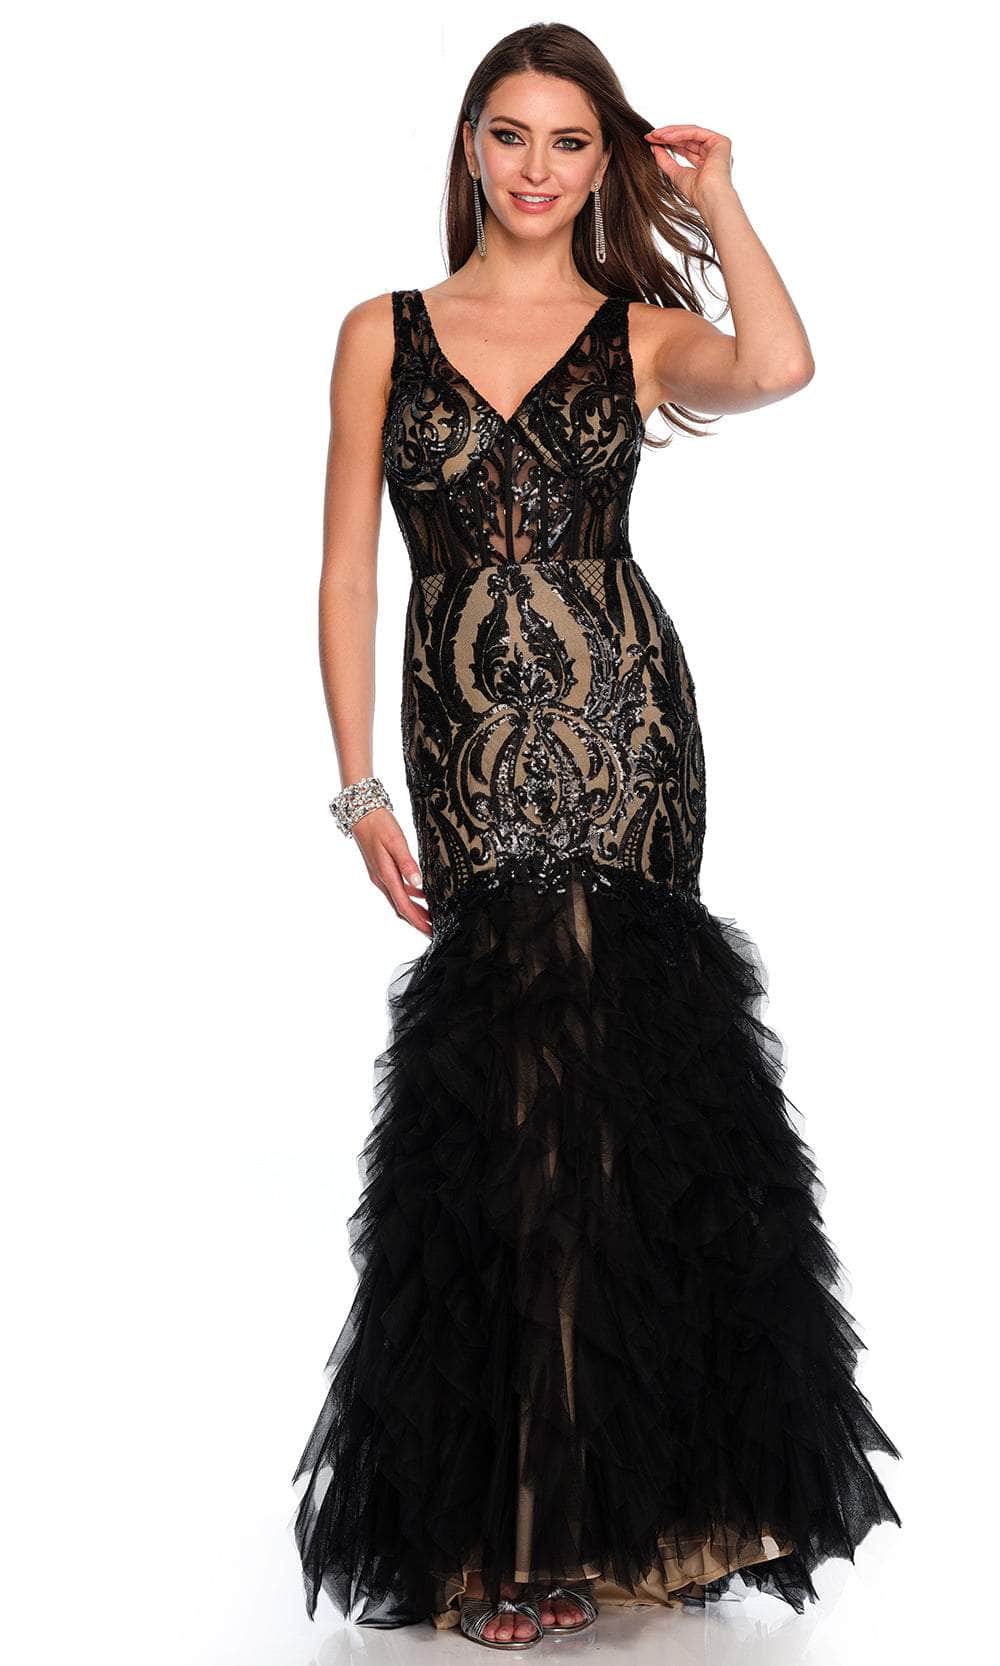 Image of Dave & Johnny 11325 - Patterned Sequin Ruffled Prom Gown